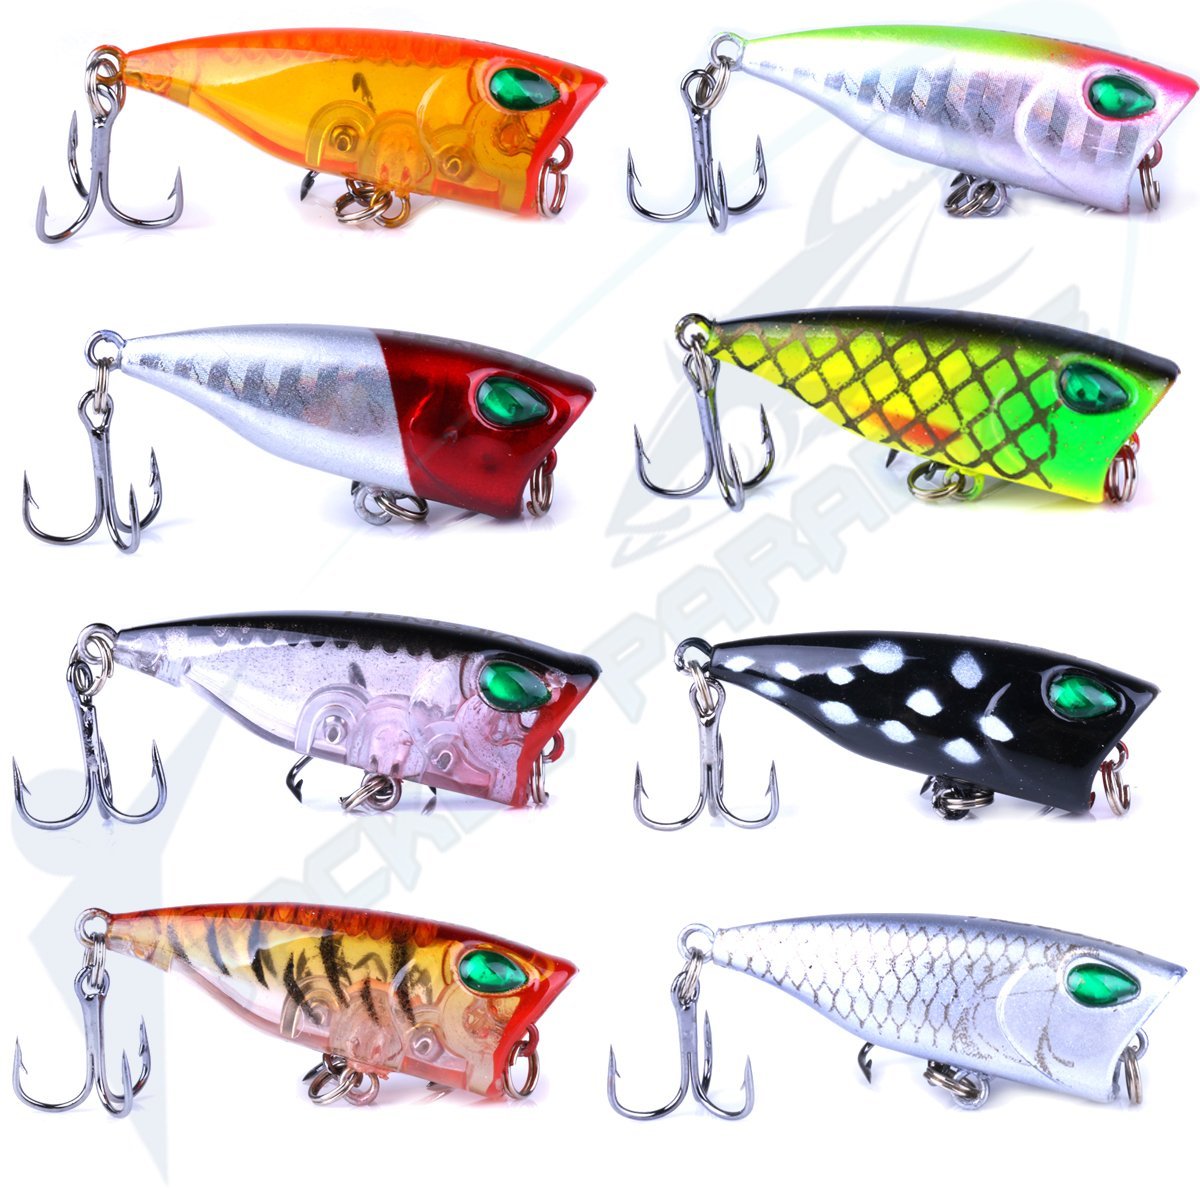 Topwater Fishing Lure Popper, Poppers Lures Freshwater